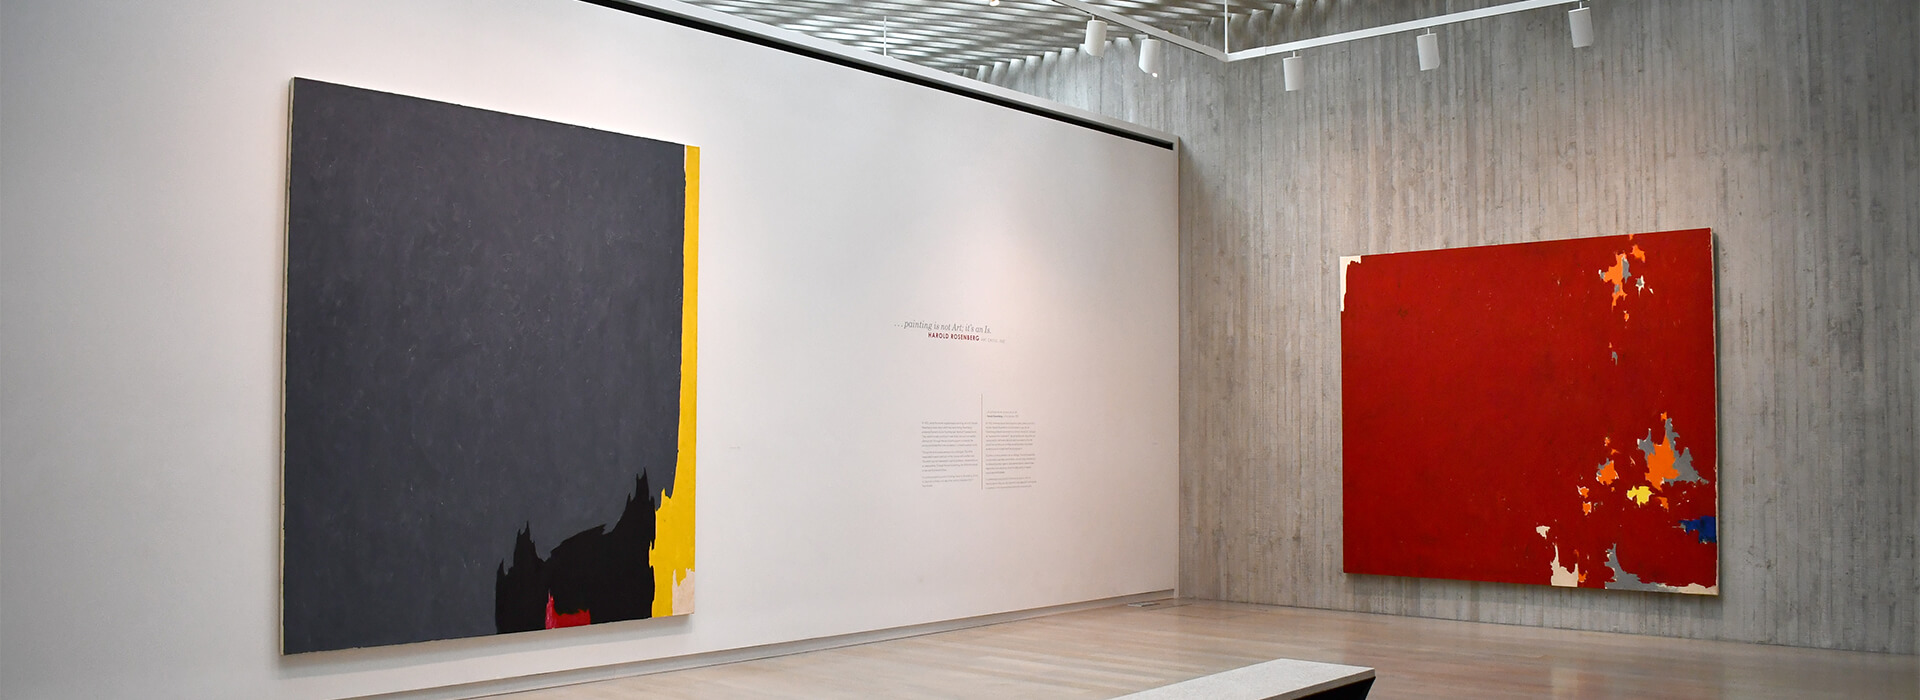 Installation image of two large abstract artworks in a gallery